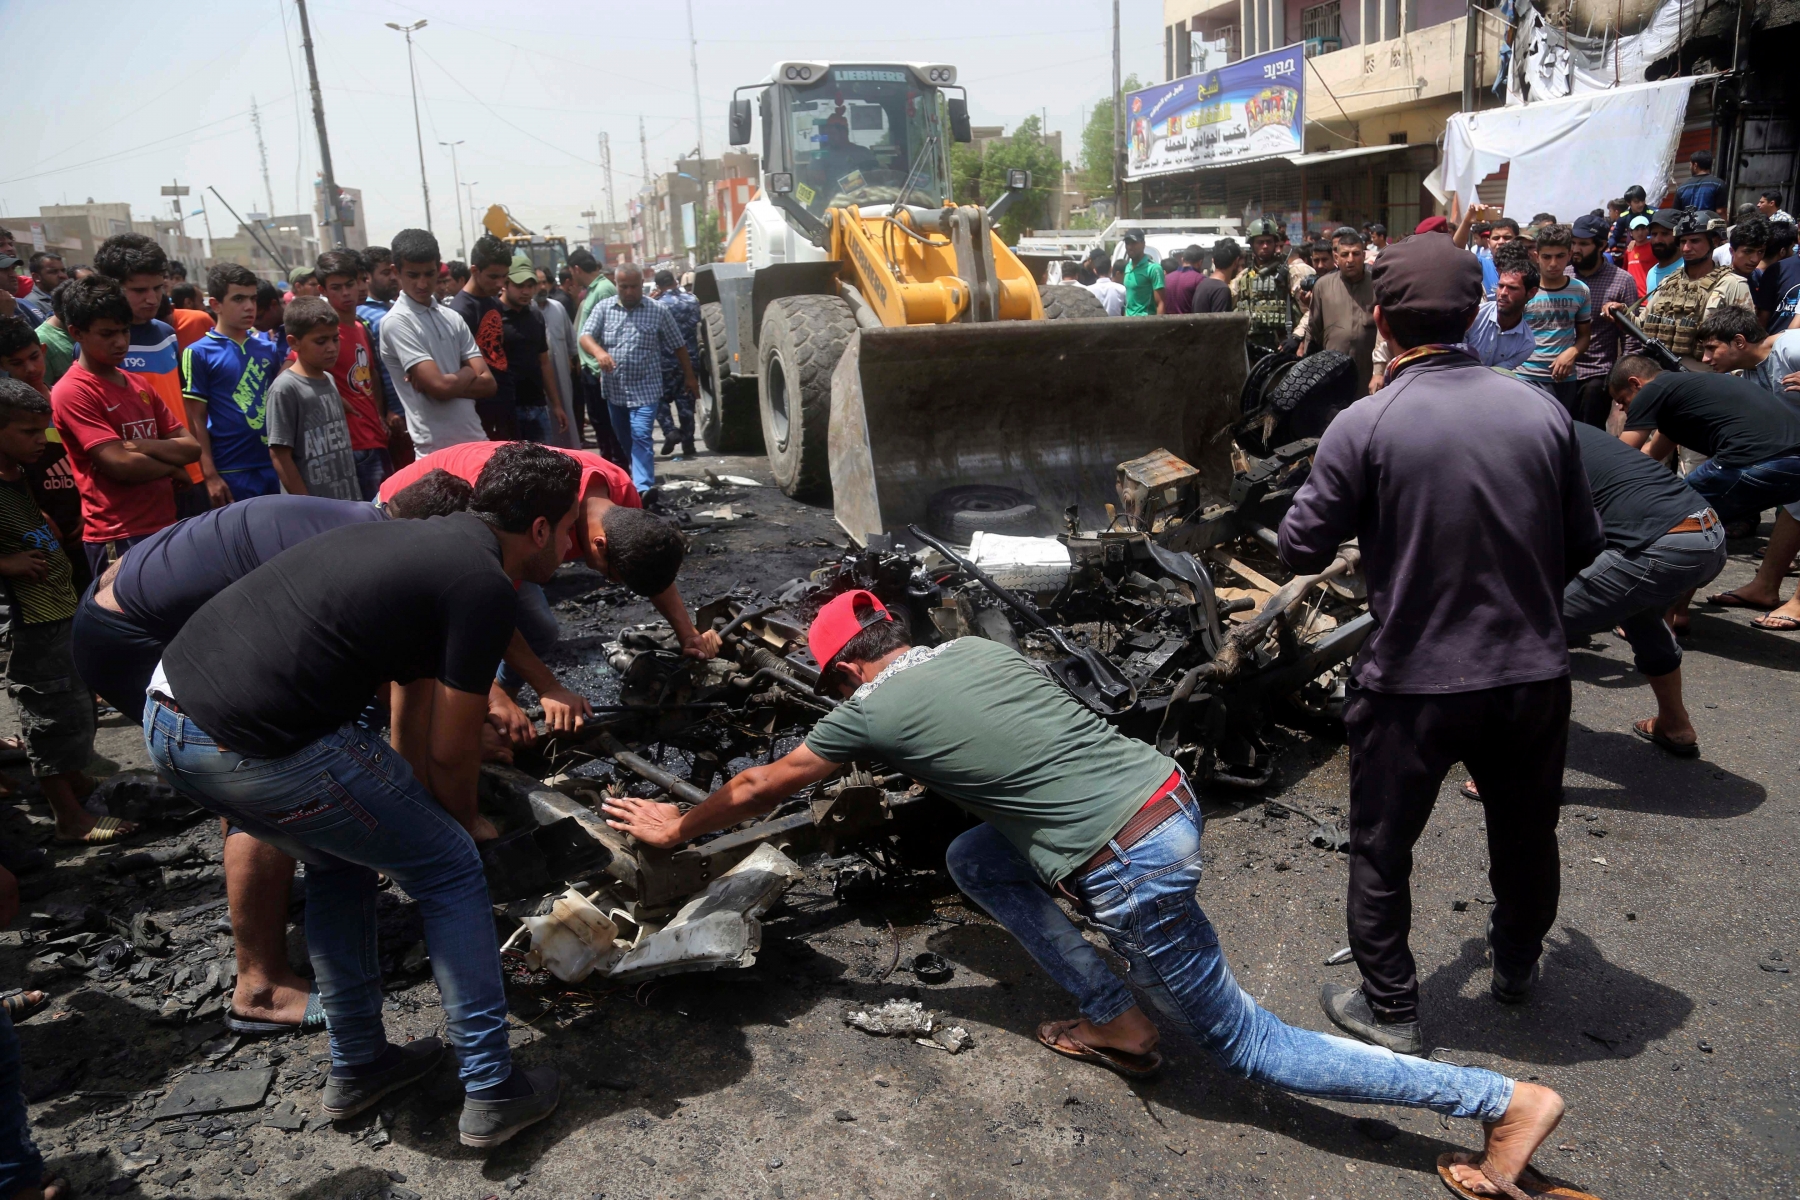 Civilians help a municipality bulldozer cleans up while citizens inspect the scene after a car bomb explosion at a crowded outdoor market in the Iraqi capital's eastern district of Sadr City, Iraq, Wednesday, May 11, 2016. An explosives-laden car bomb ripped through a commercial area in a predominantly Shiite neighborhood of Baghdad on Wednesday, killing and wounding dozens of civilians, a police official said. (AP Photo/ Khalid Mohammed) Mideast Iraq